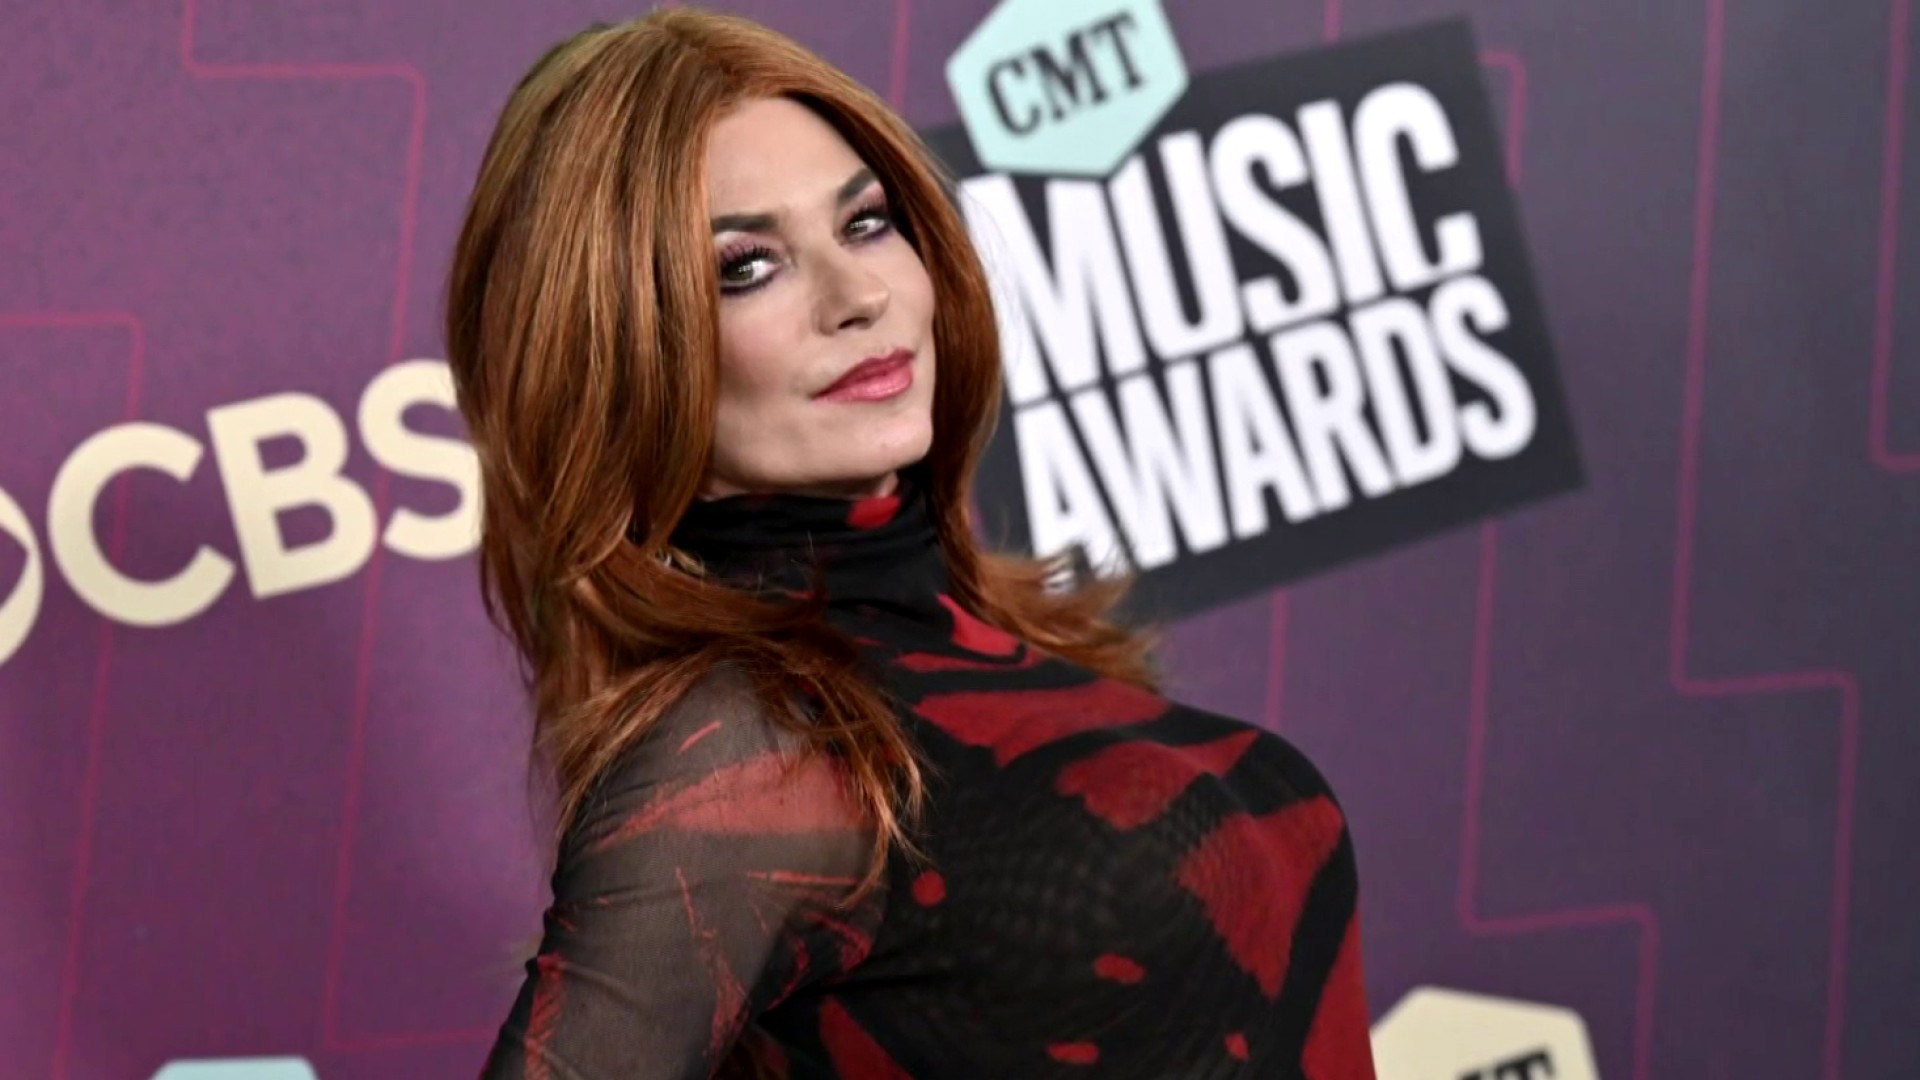 'Global superstar' Shania Twain to take the stage at Forbes, Know Your